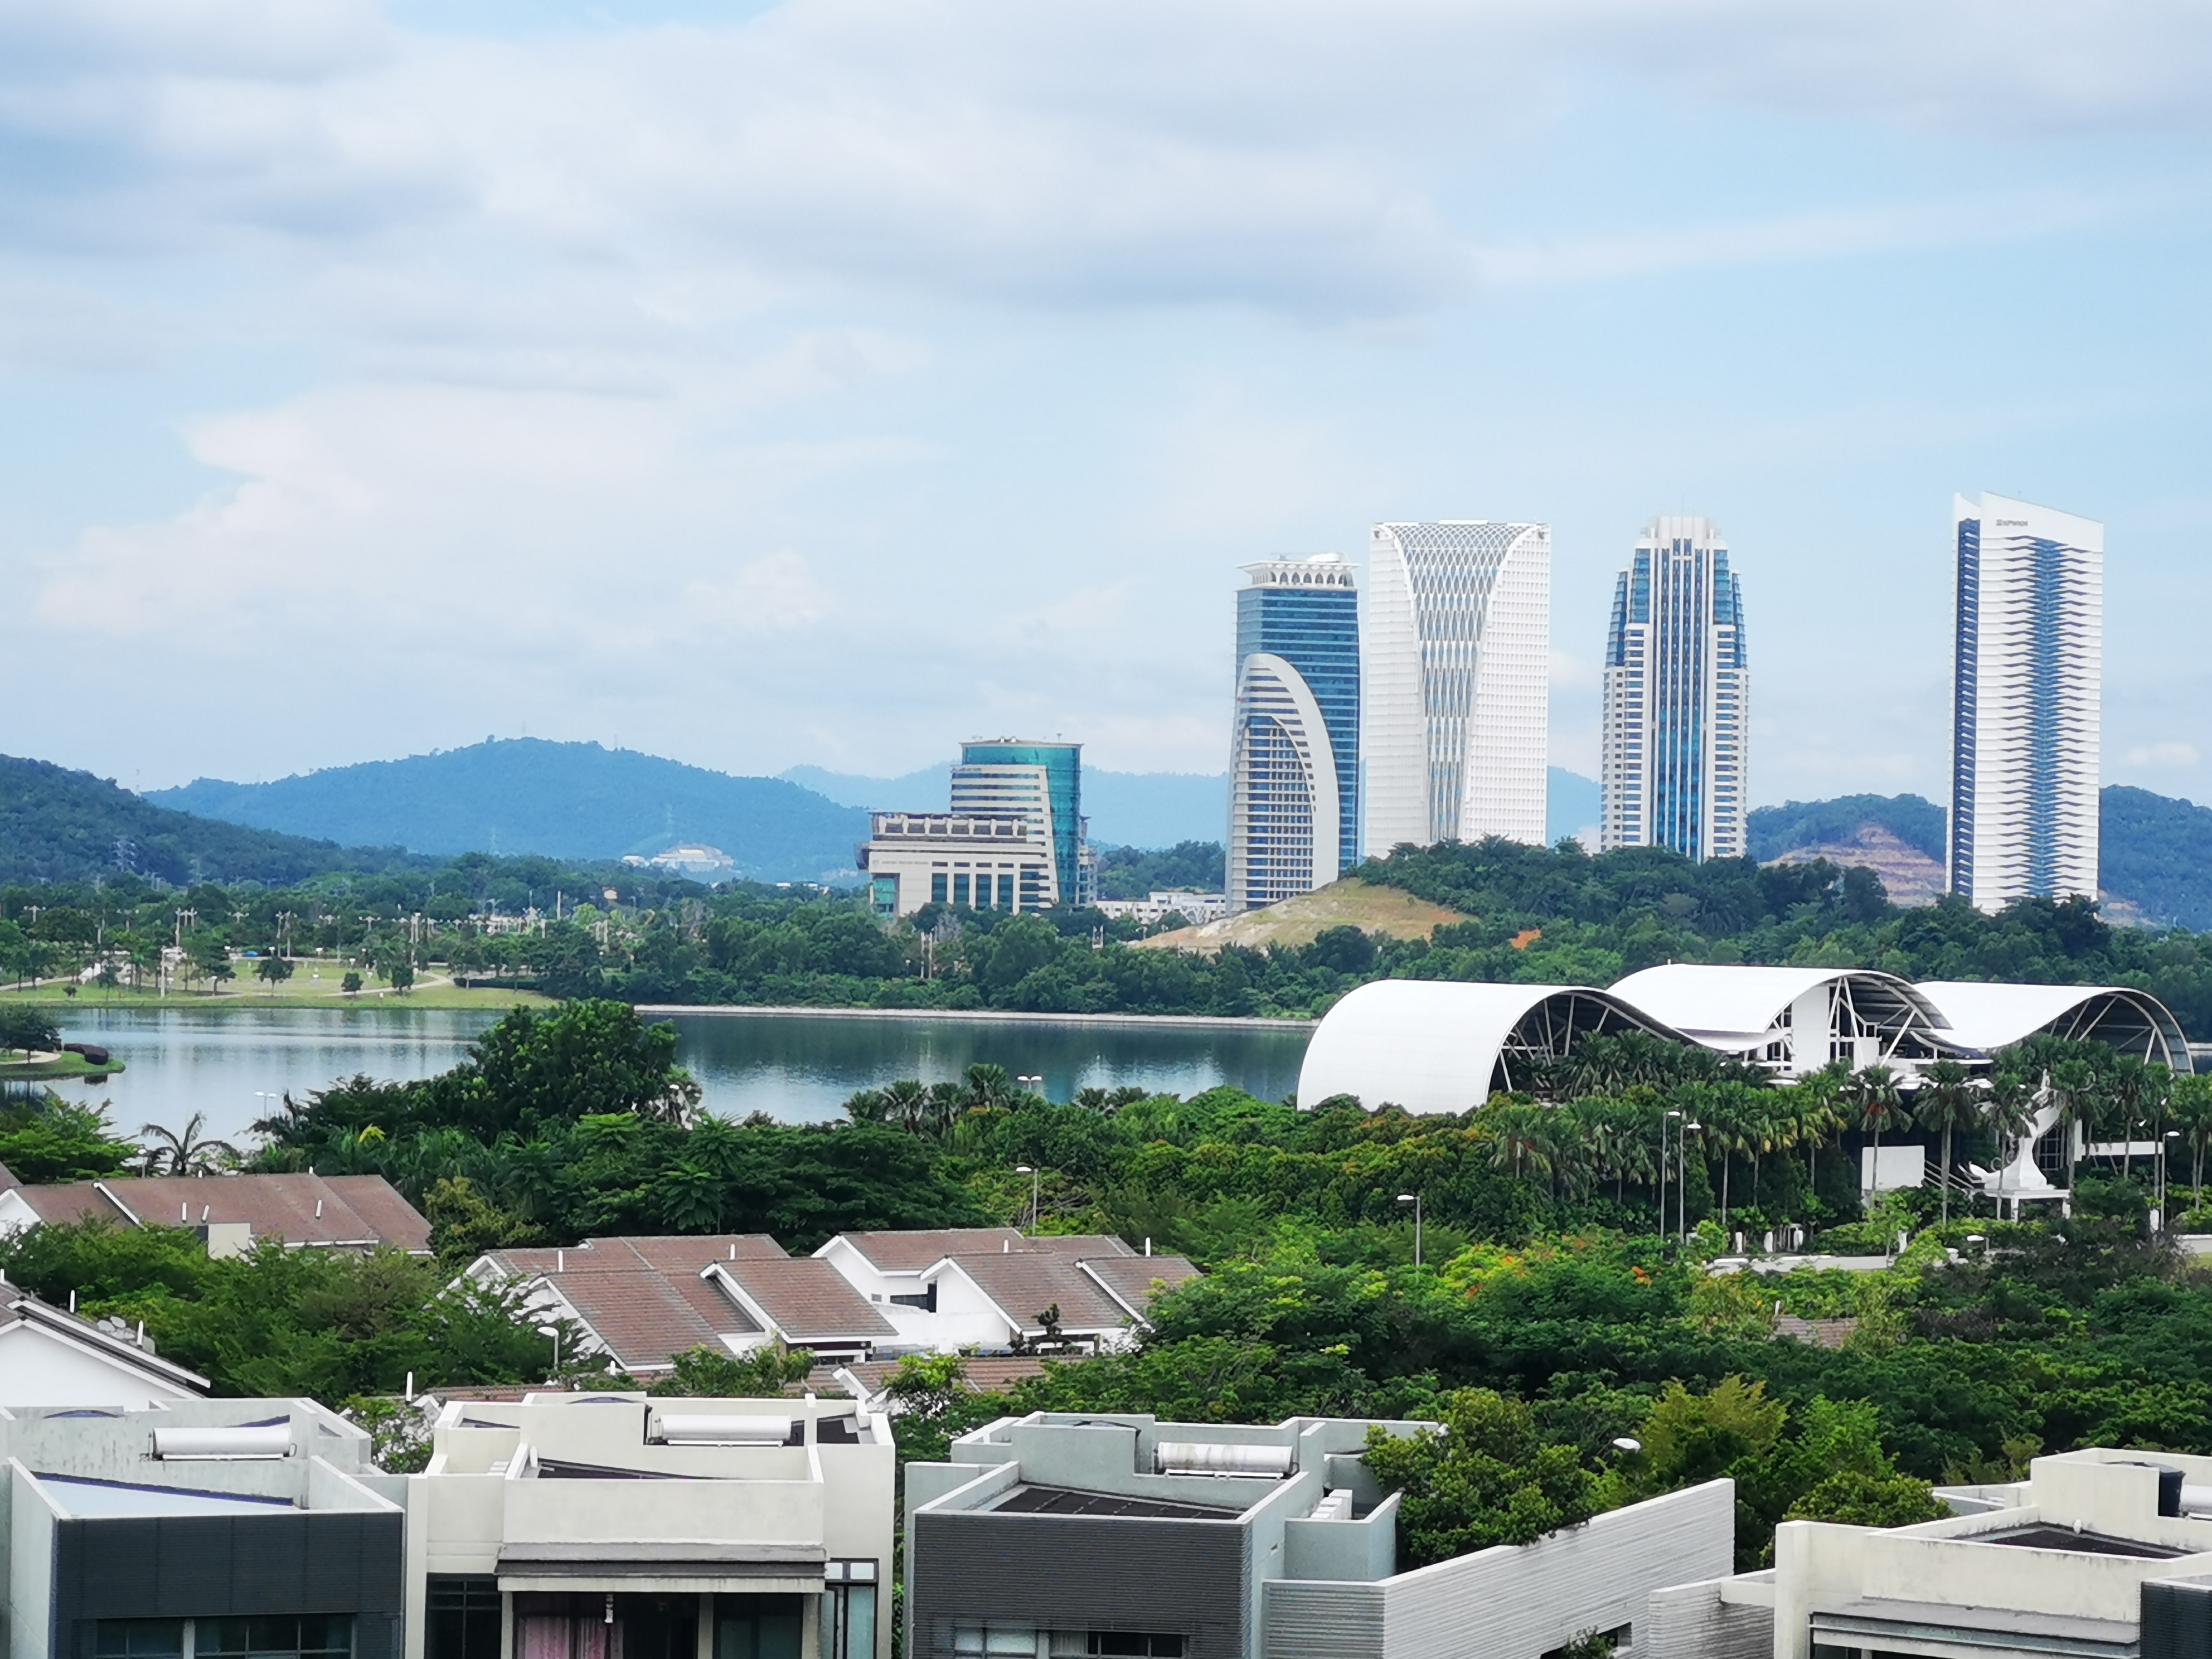 Nature, lake, modern buildings, the million dollar view from Mirage by the Lake in Cyberjaya